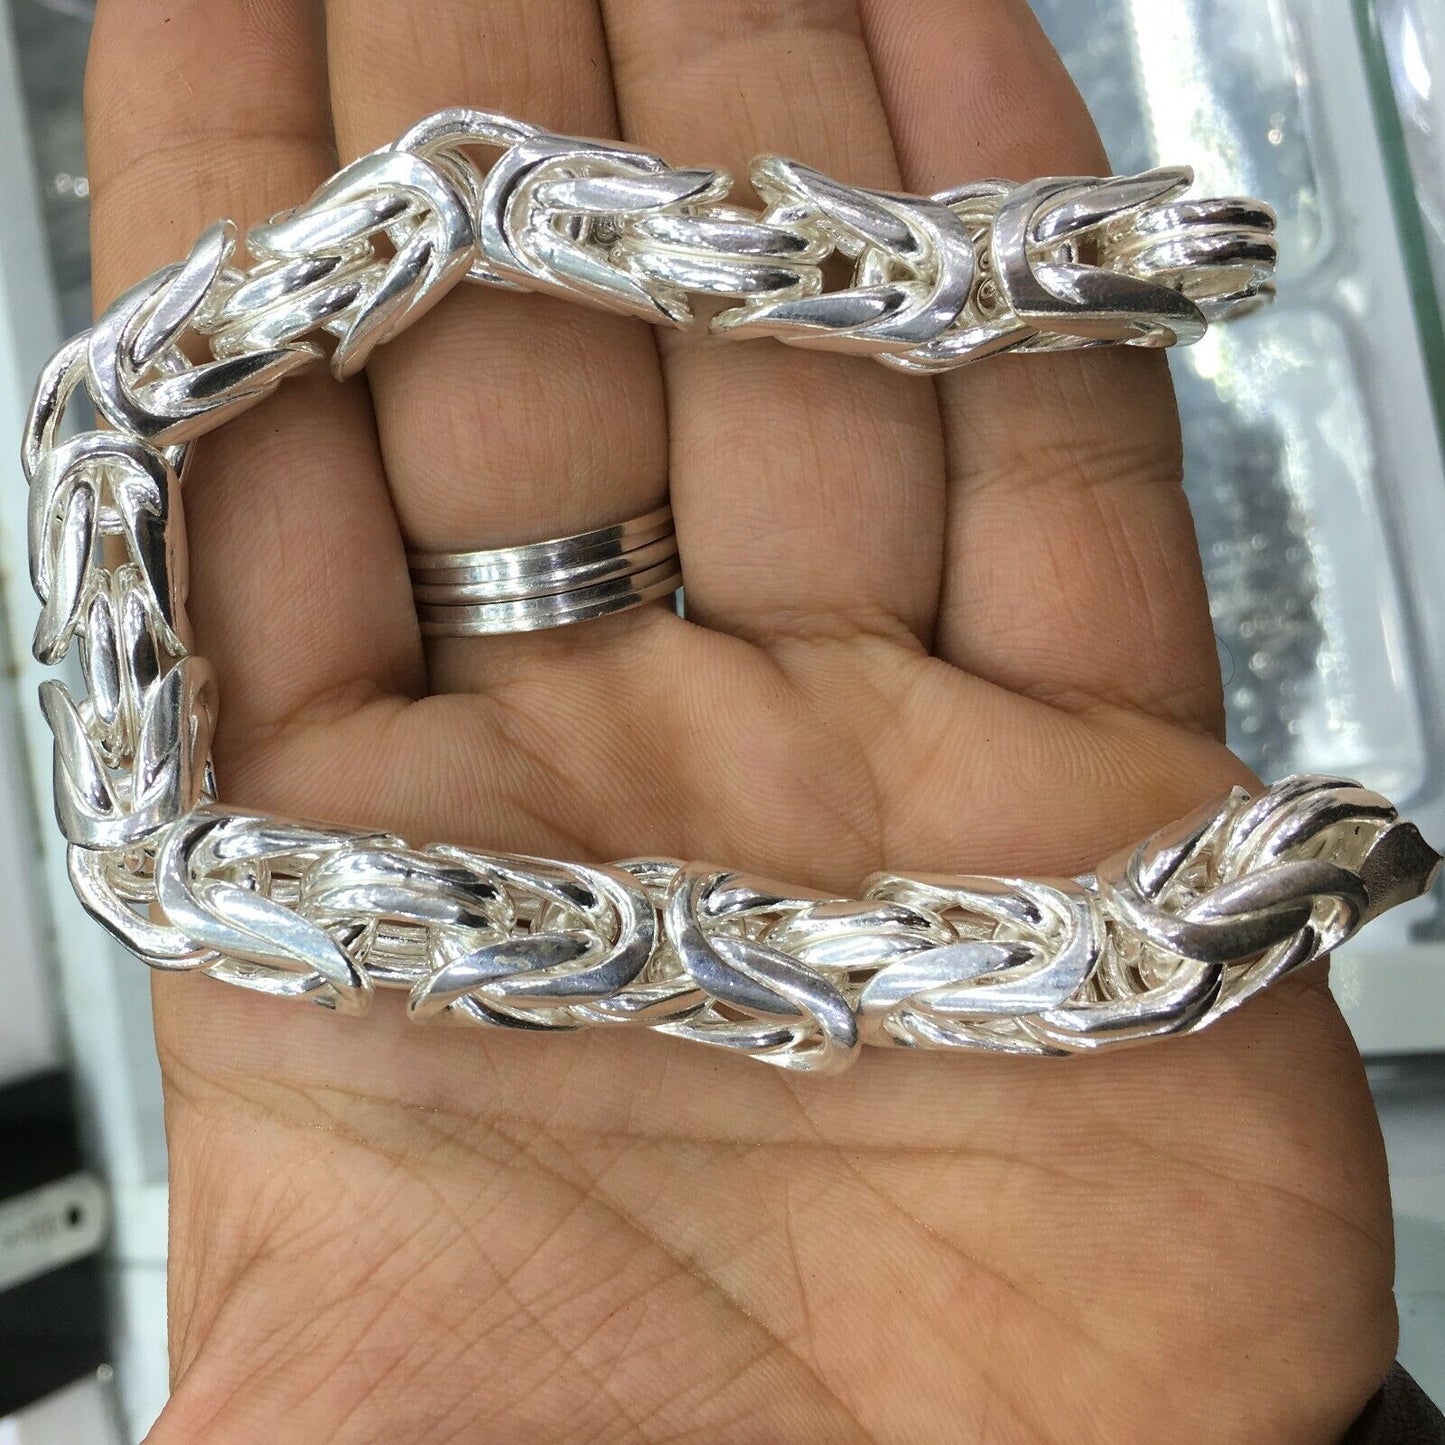 Solid Silver Bracelet Byzantine King's Chain 10 mm thick heavy Mens Jewelry 925 Sterling